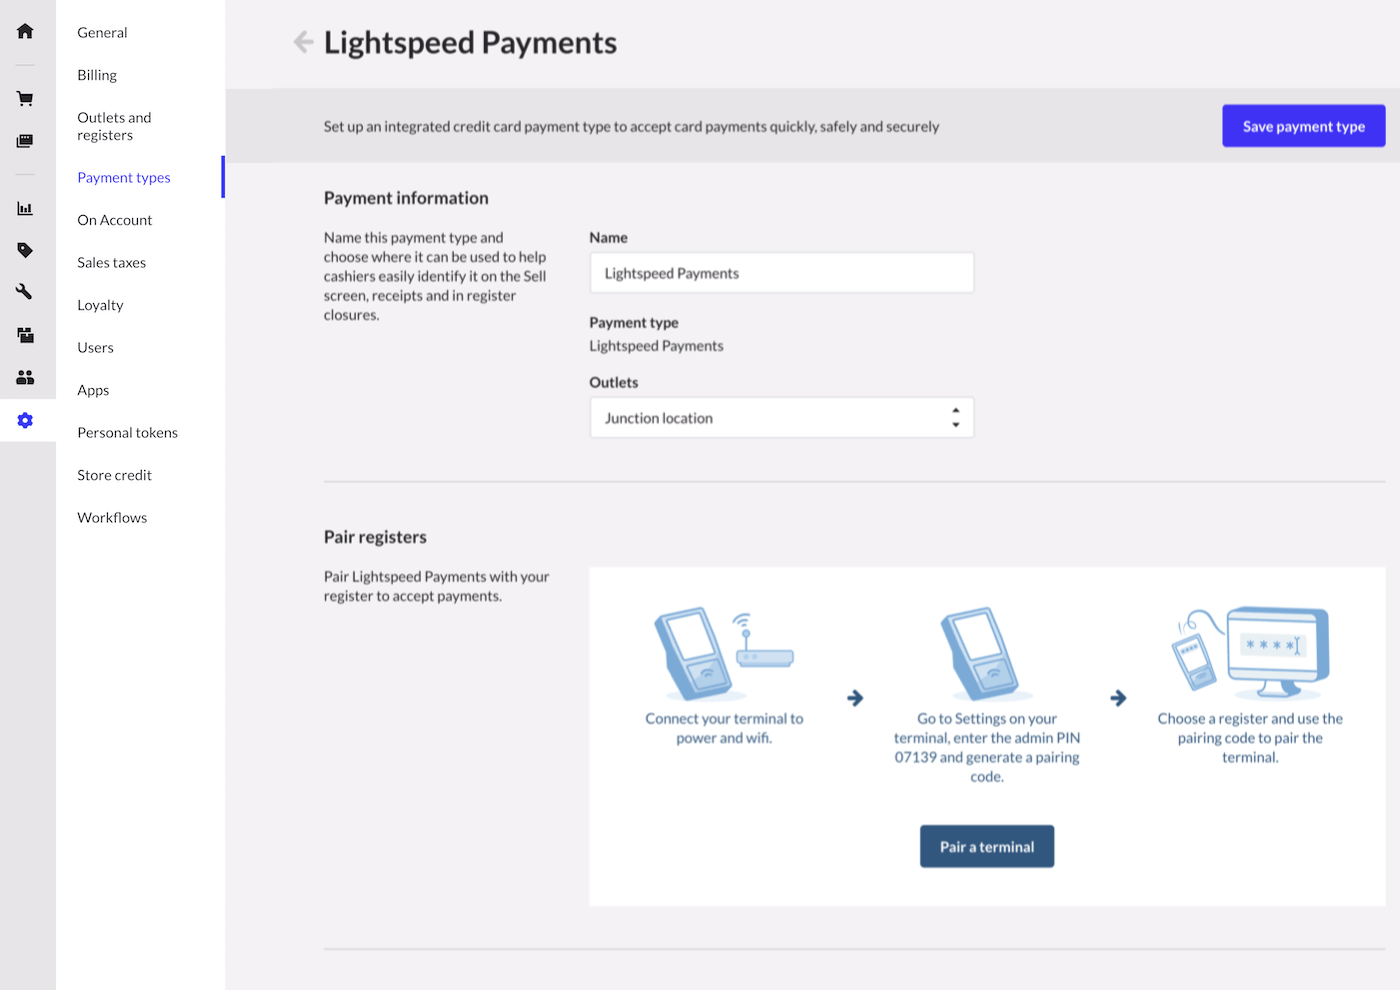 Customize the Lightspeed Payments payment type in the Payments types section.